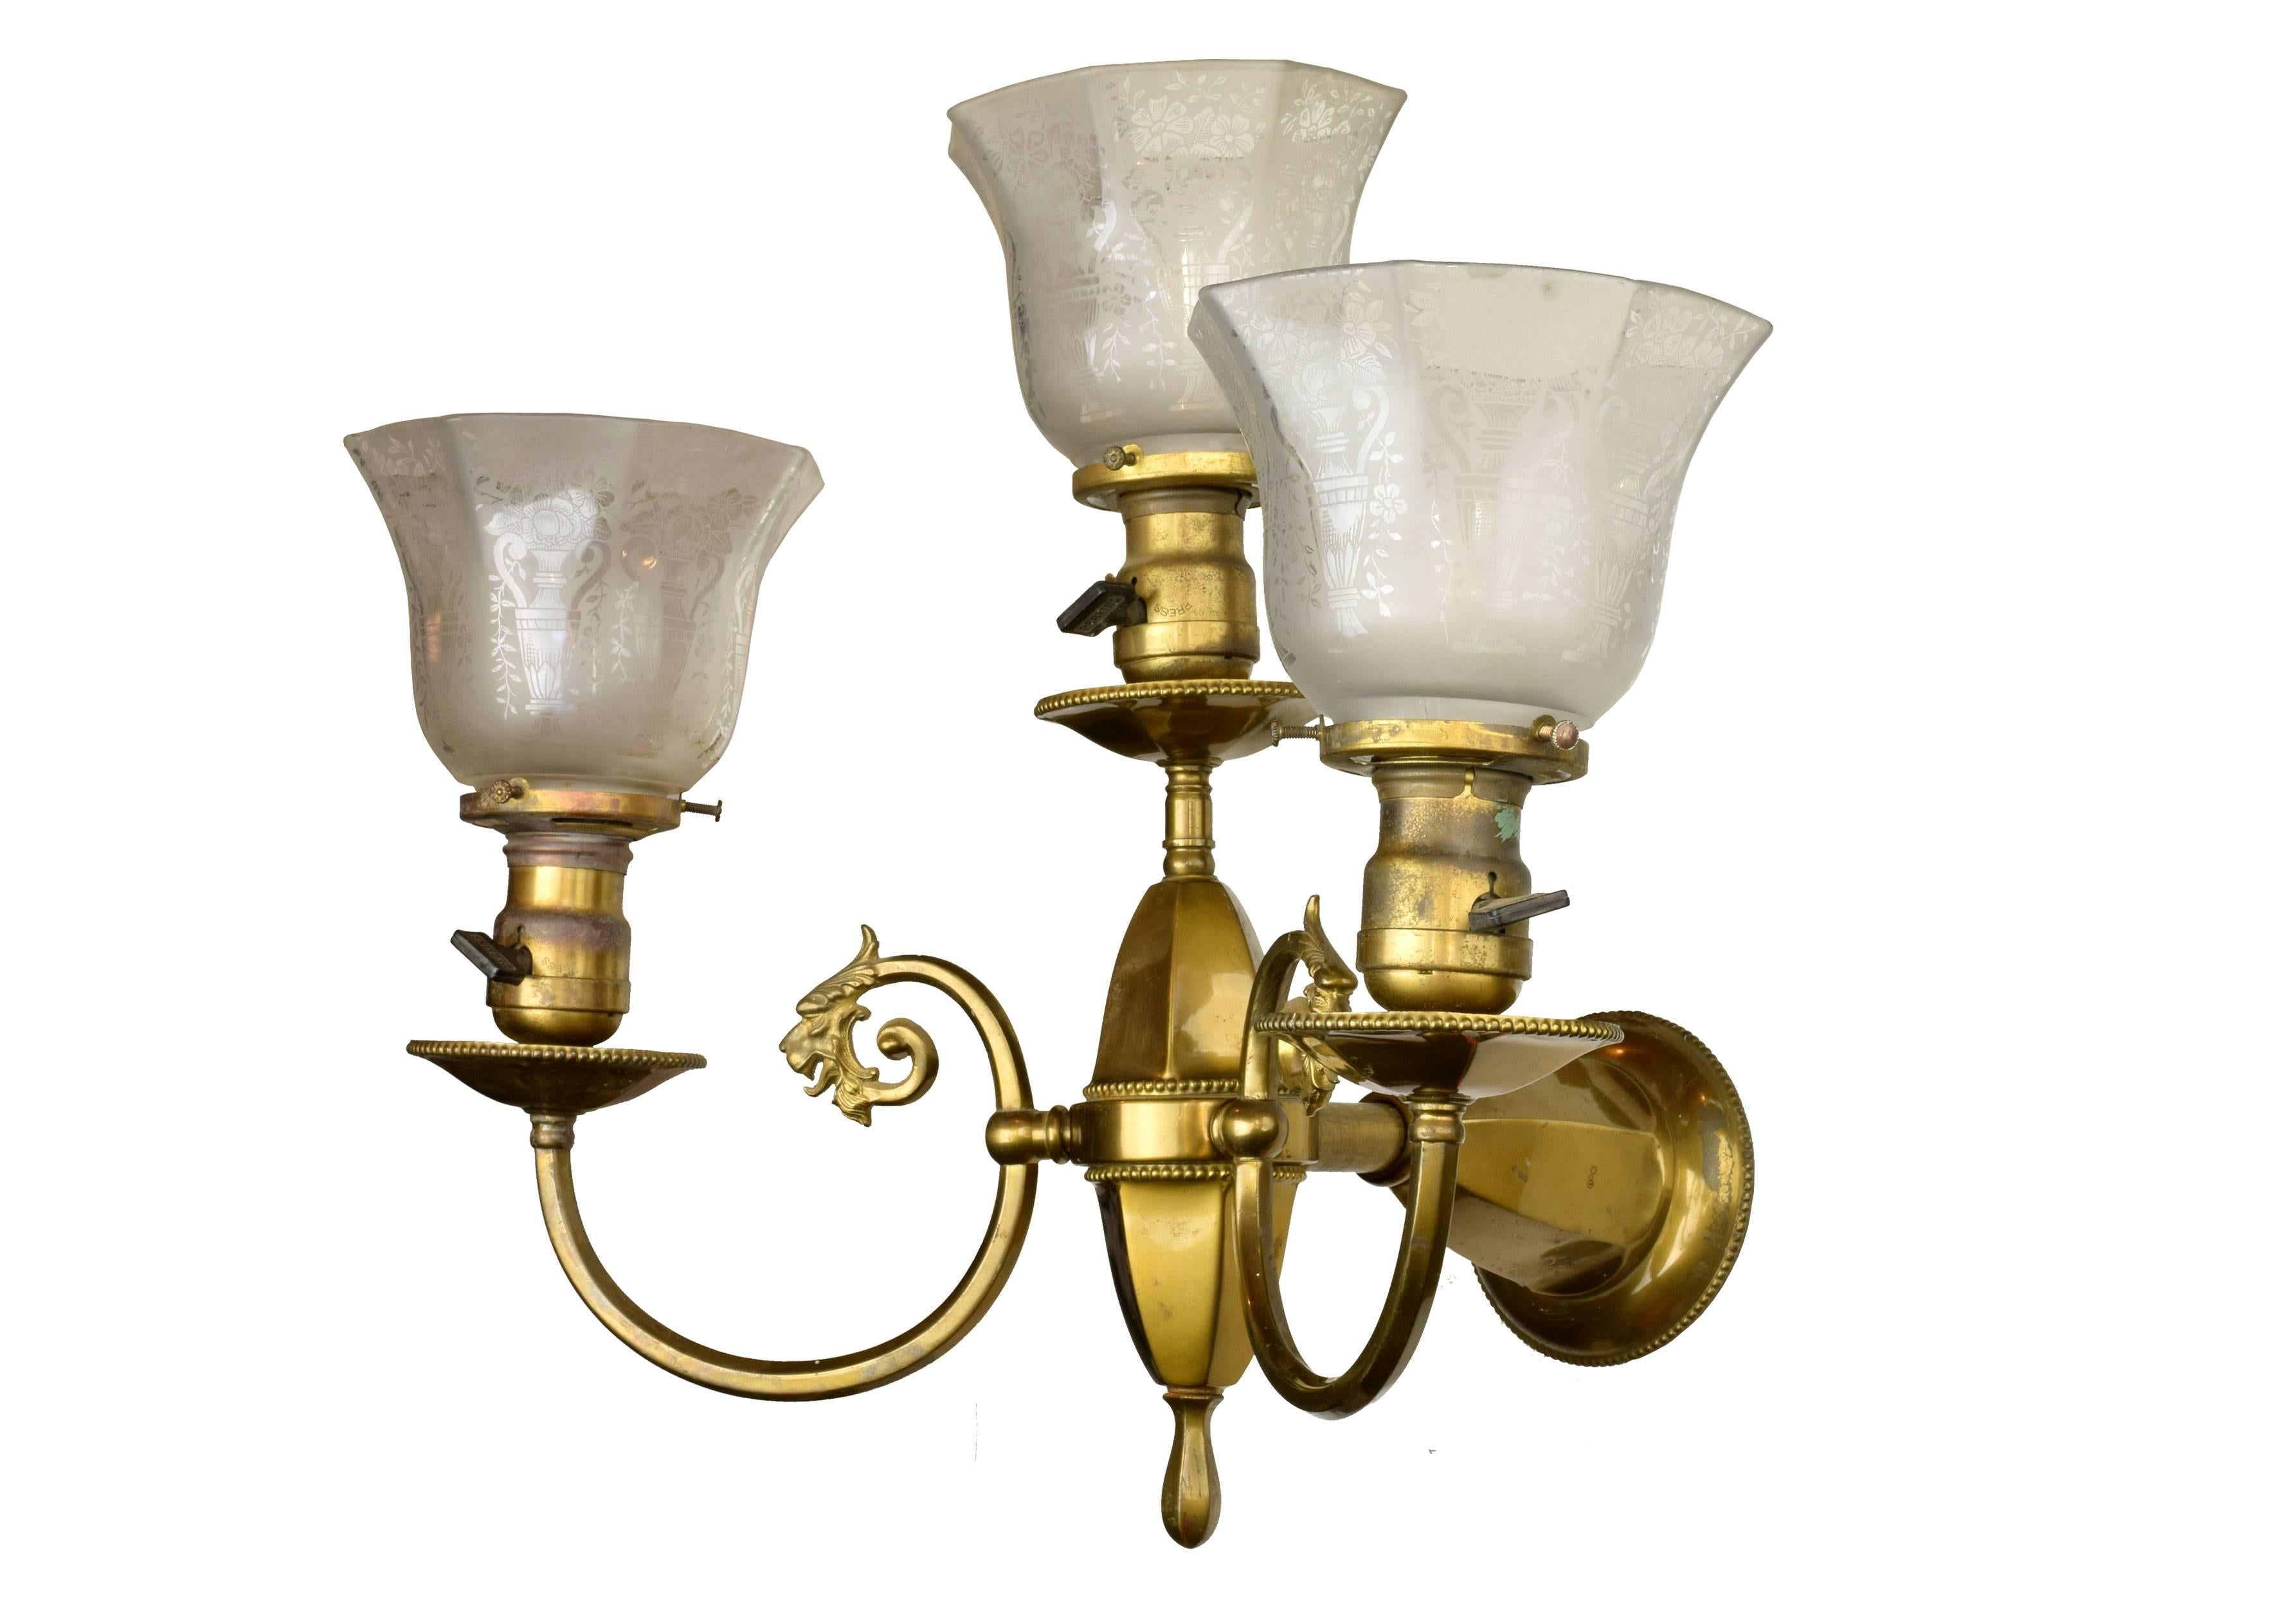 Two griffin heads embellish the elegant, clean lines of this three arm brass sconce from esteemed manufacturer Beardslee. It is truly an exquisite piece, one that will be cherished for years to come. 

Shades included
Three medium sockets

We